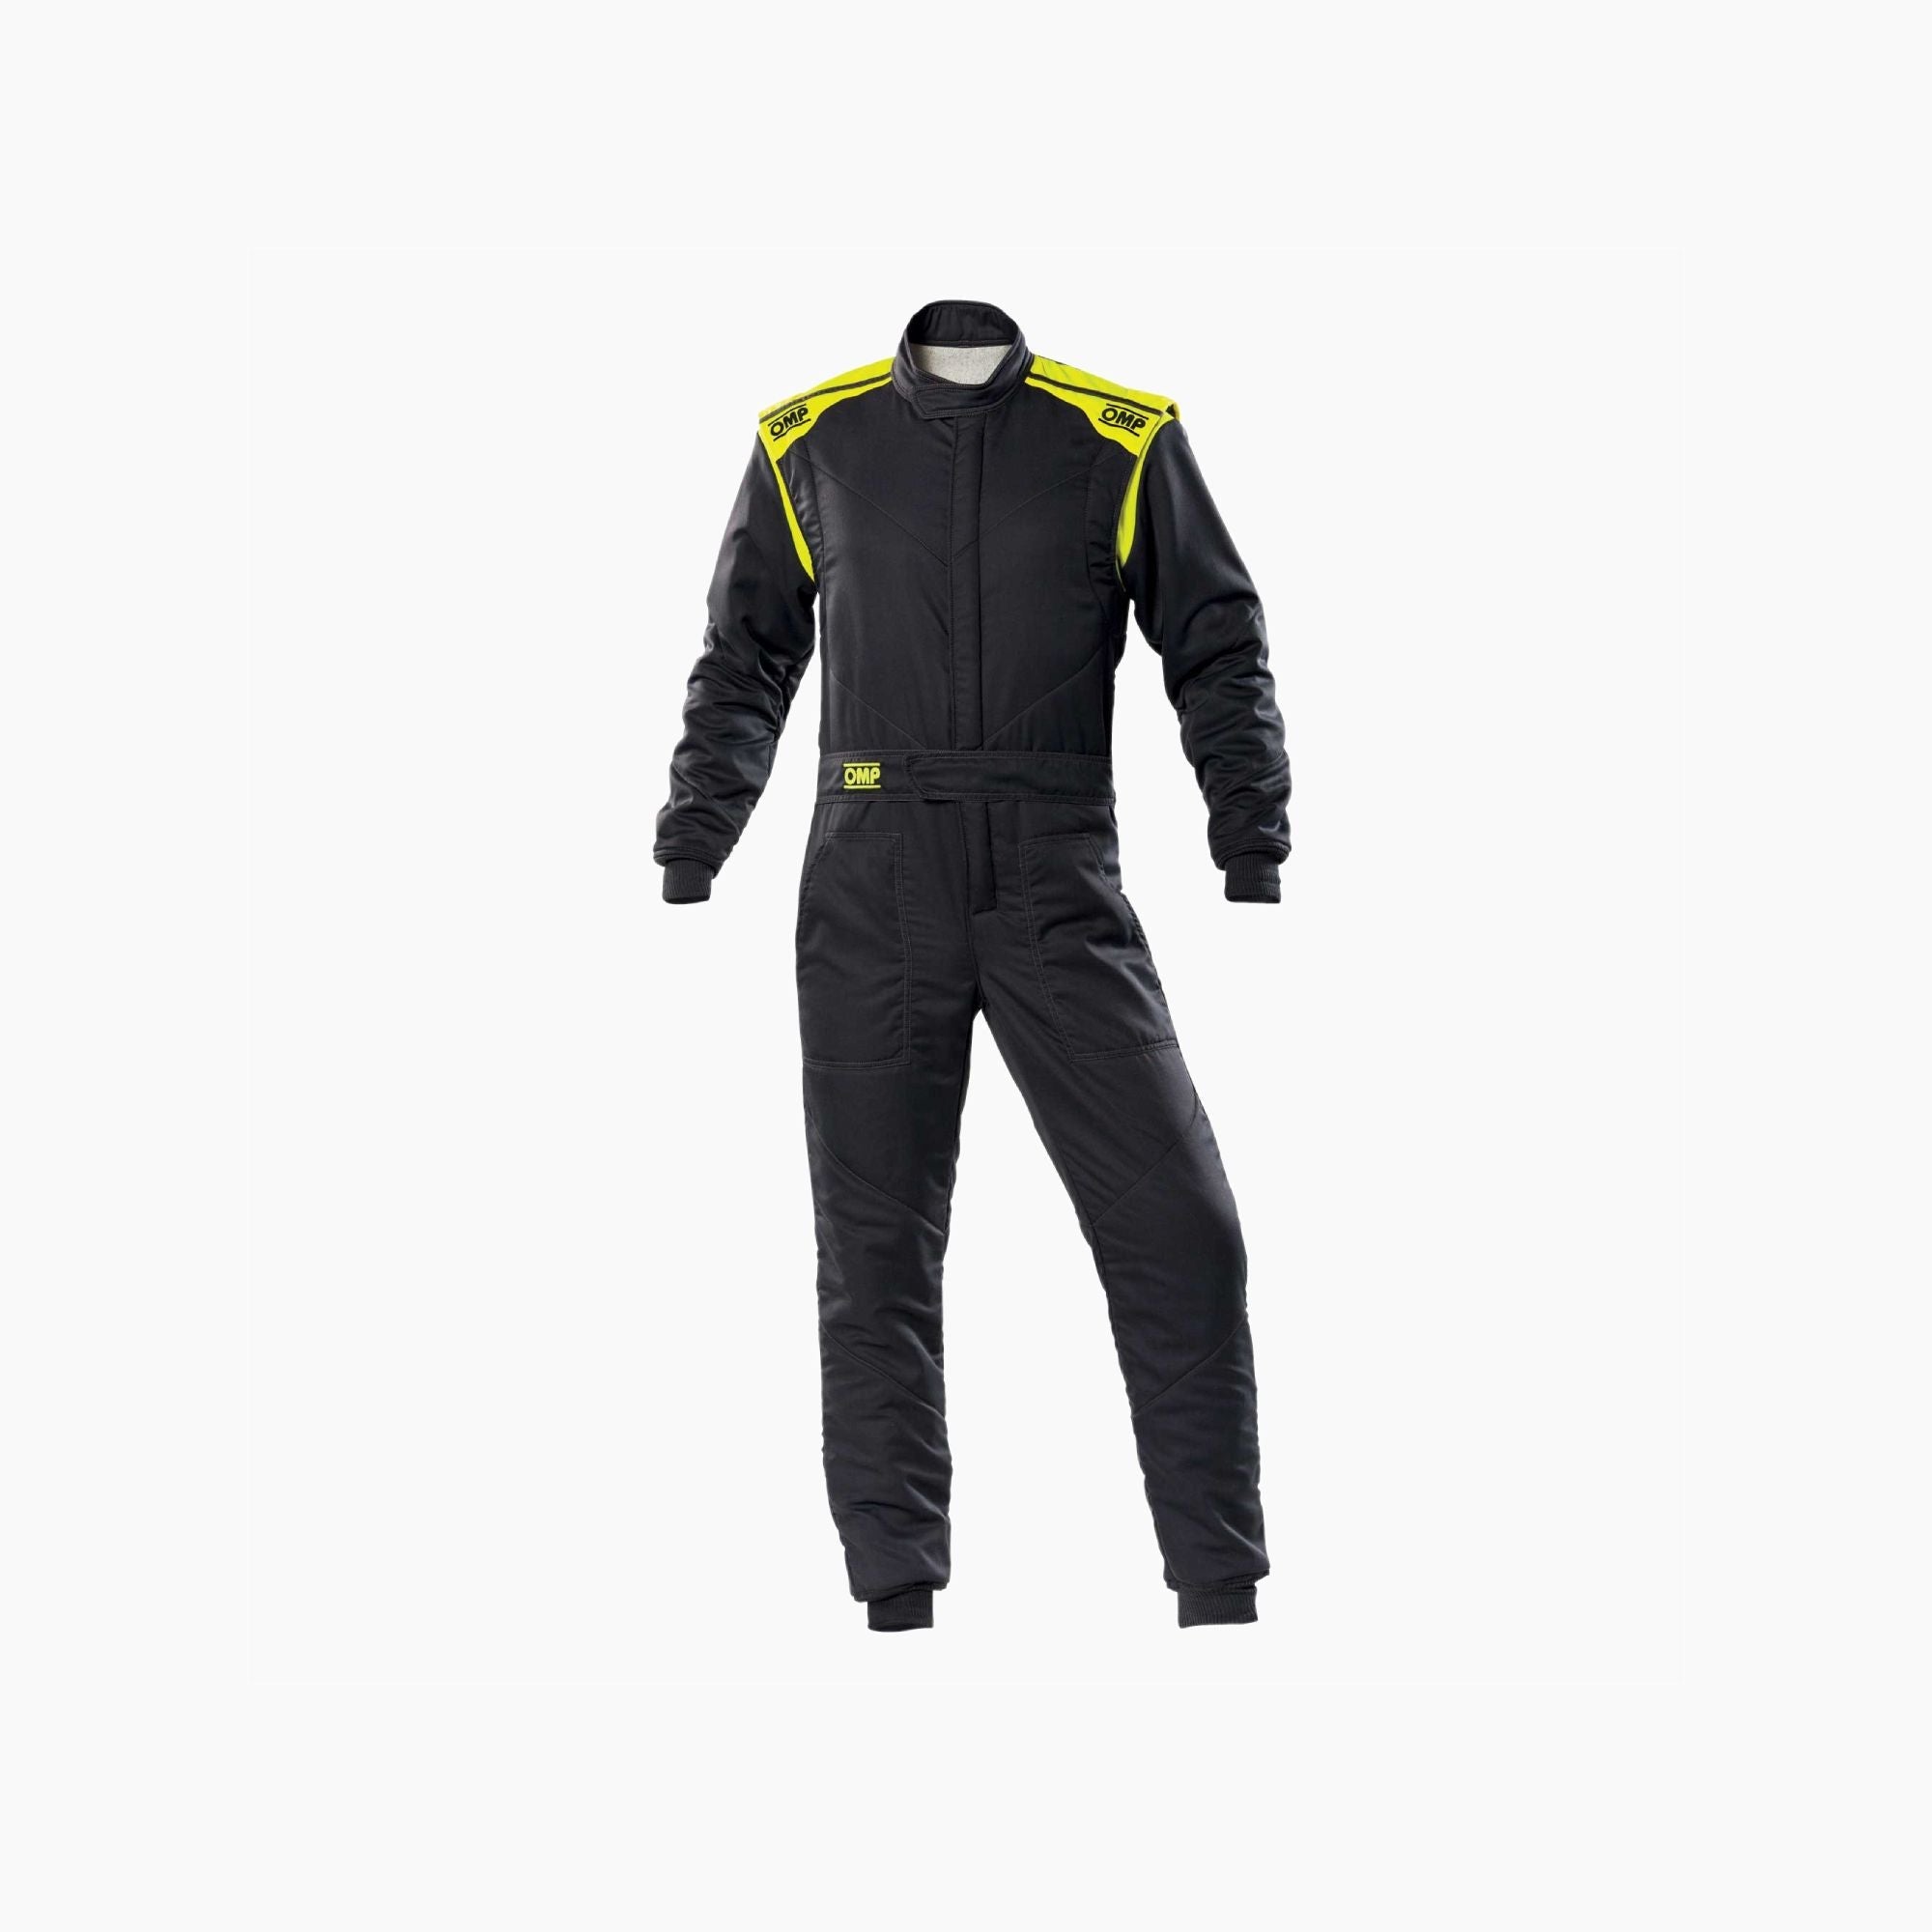 OMP | FIRST-S Racing Suit-Racing Suit-OMP-gpx-store